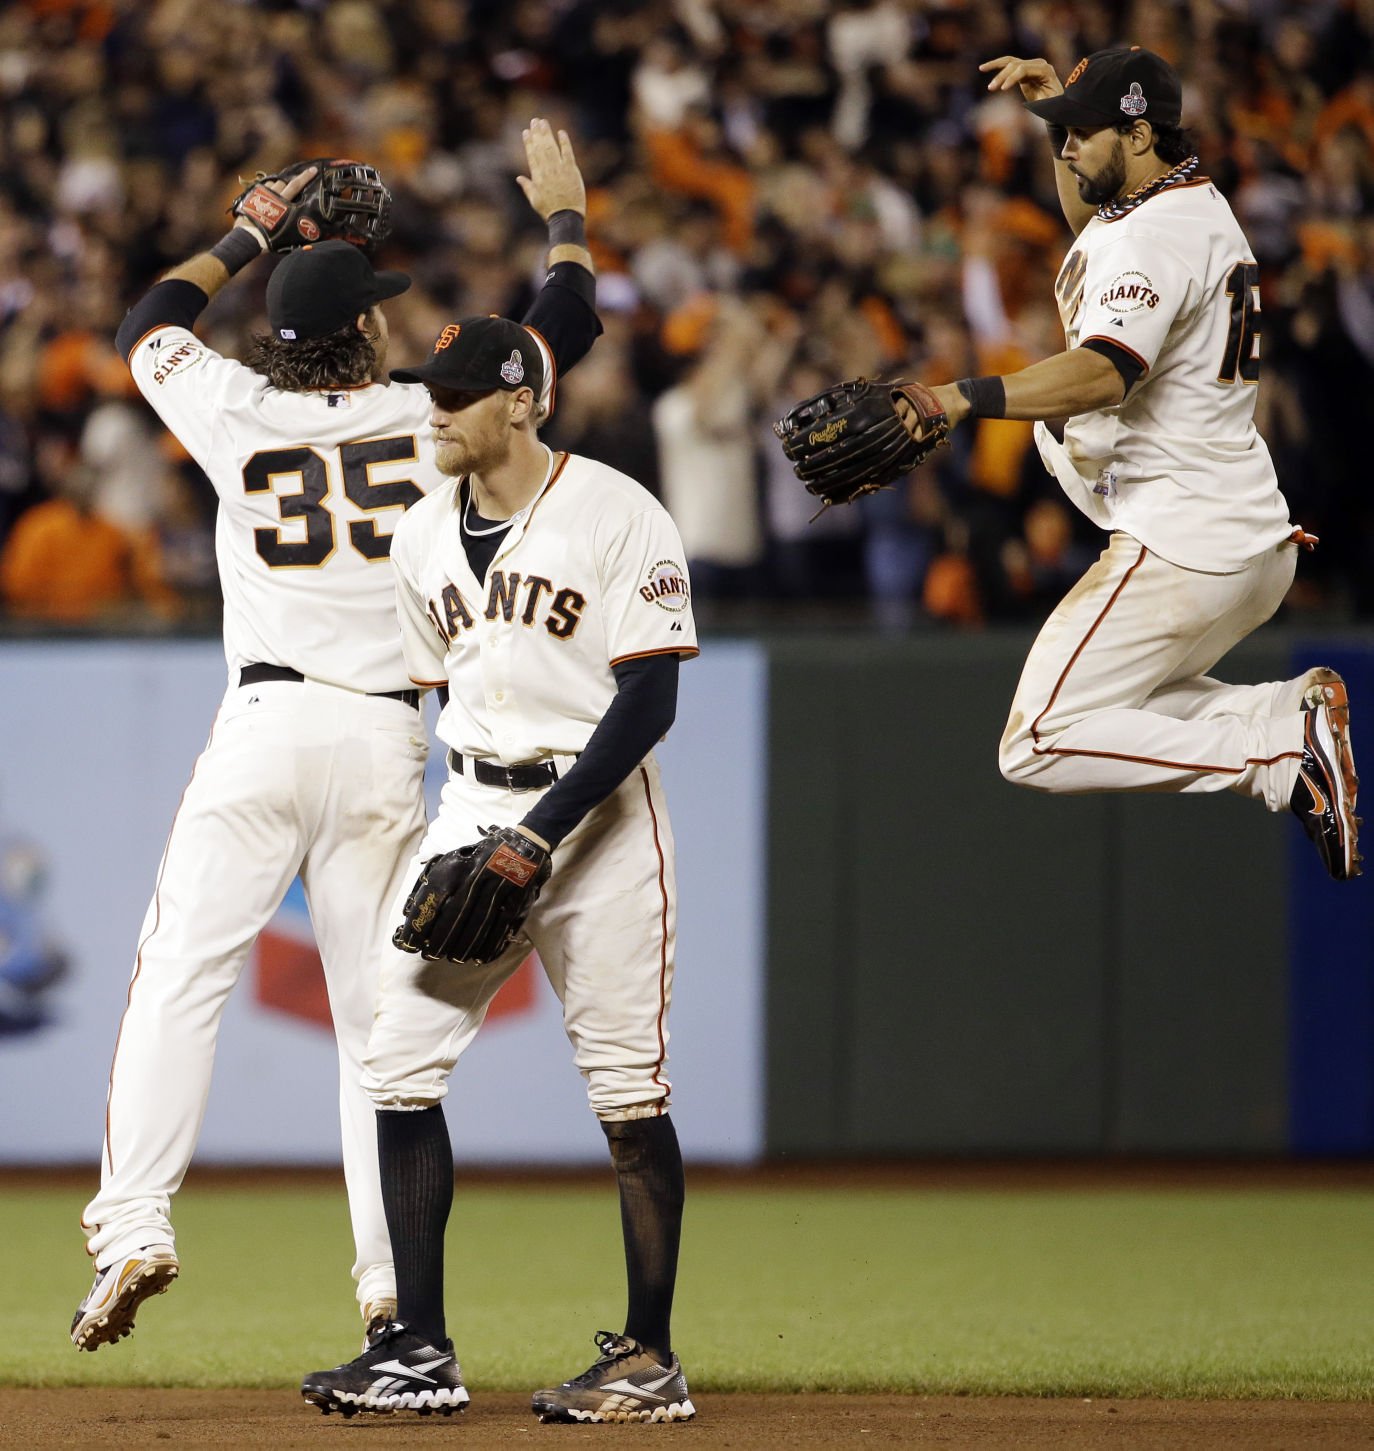 WORLD SERIES: San Francisco Giants jump to 2-0 lead over Detroit Tigers